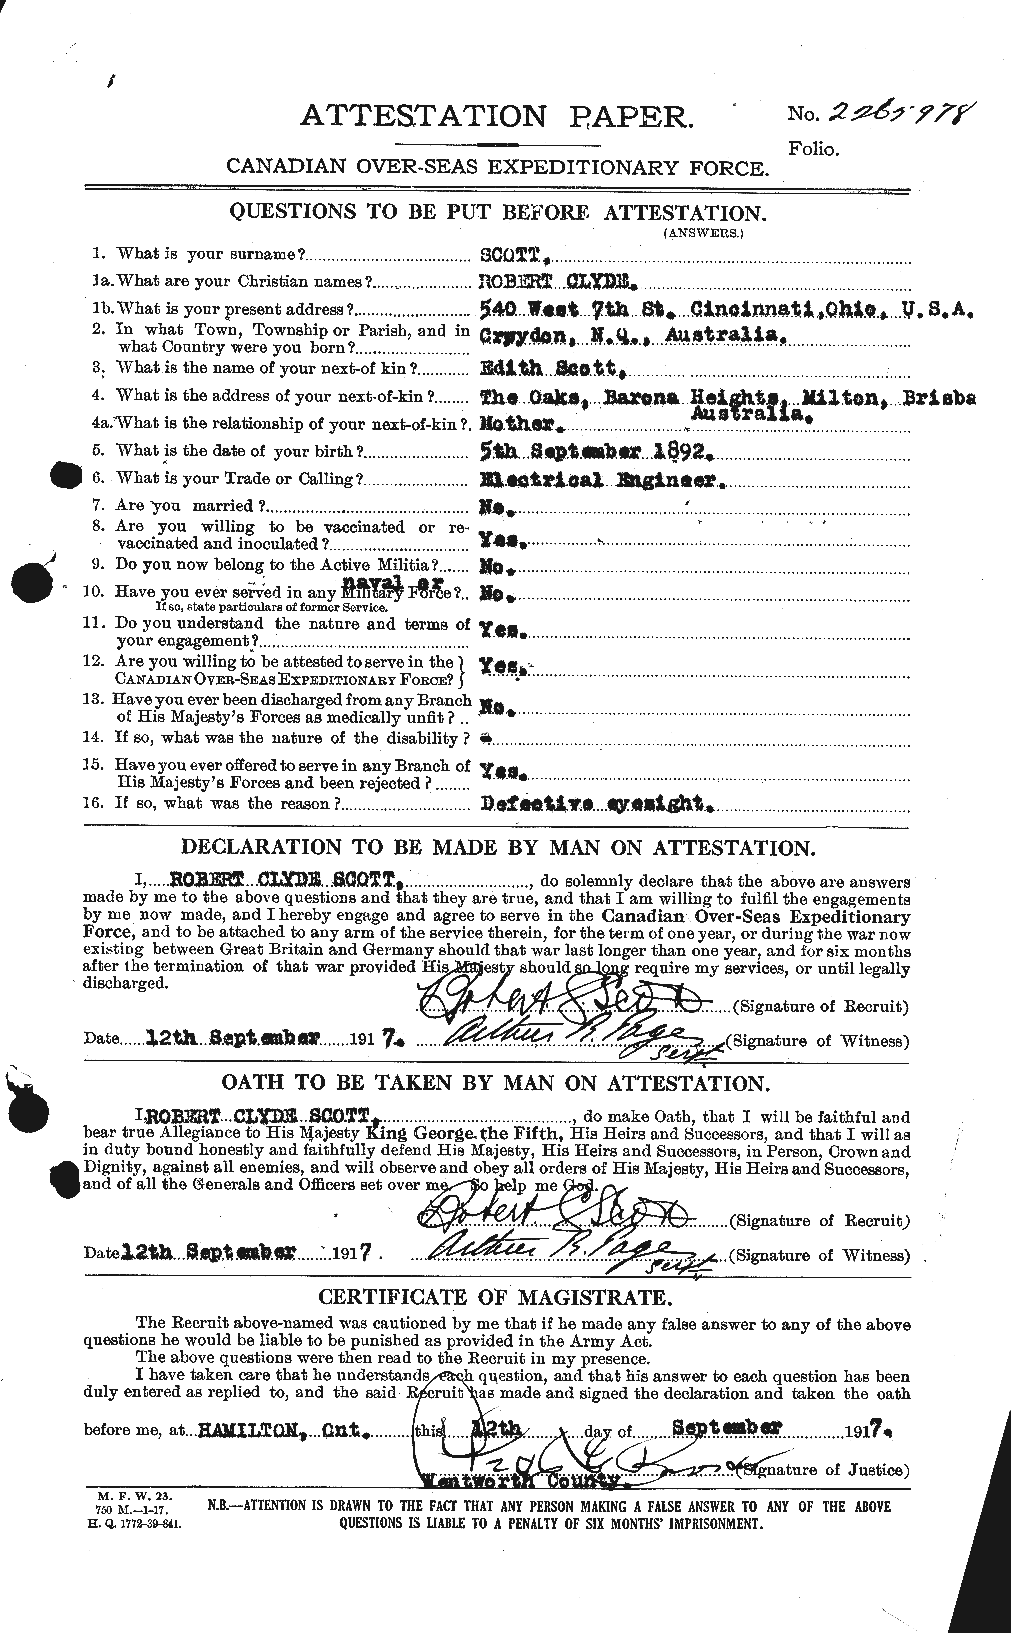 Personnel Records of the First World War - CEF 089208a